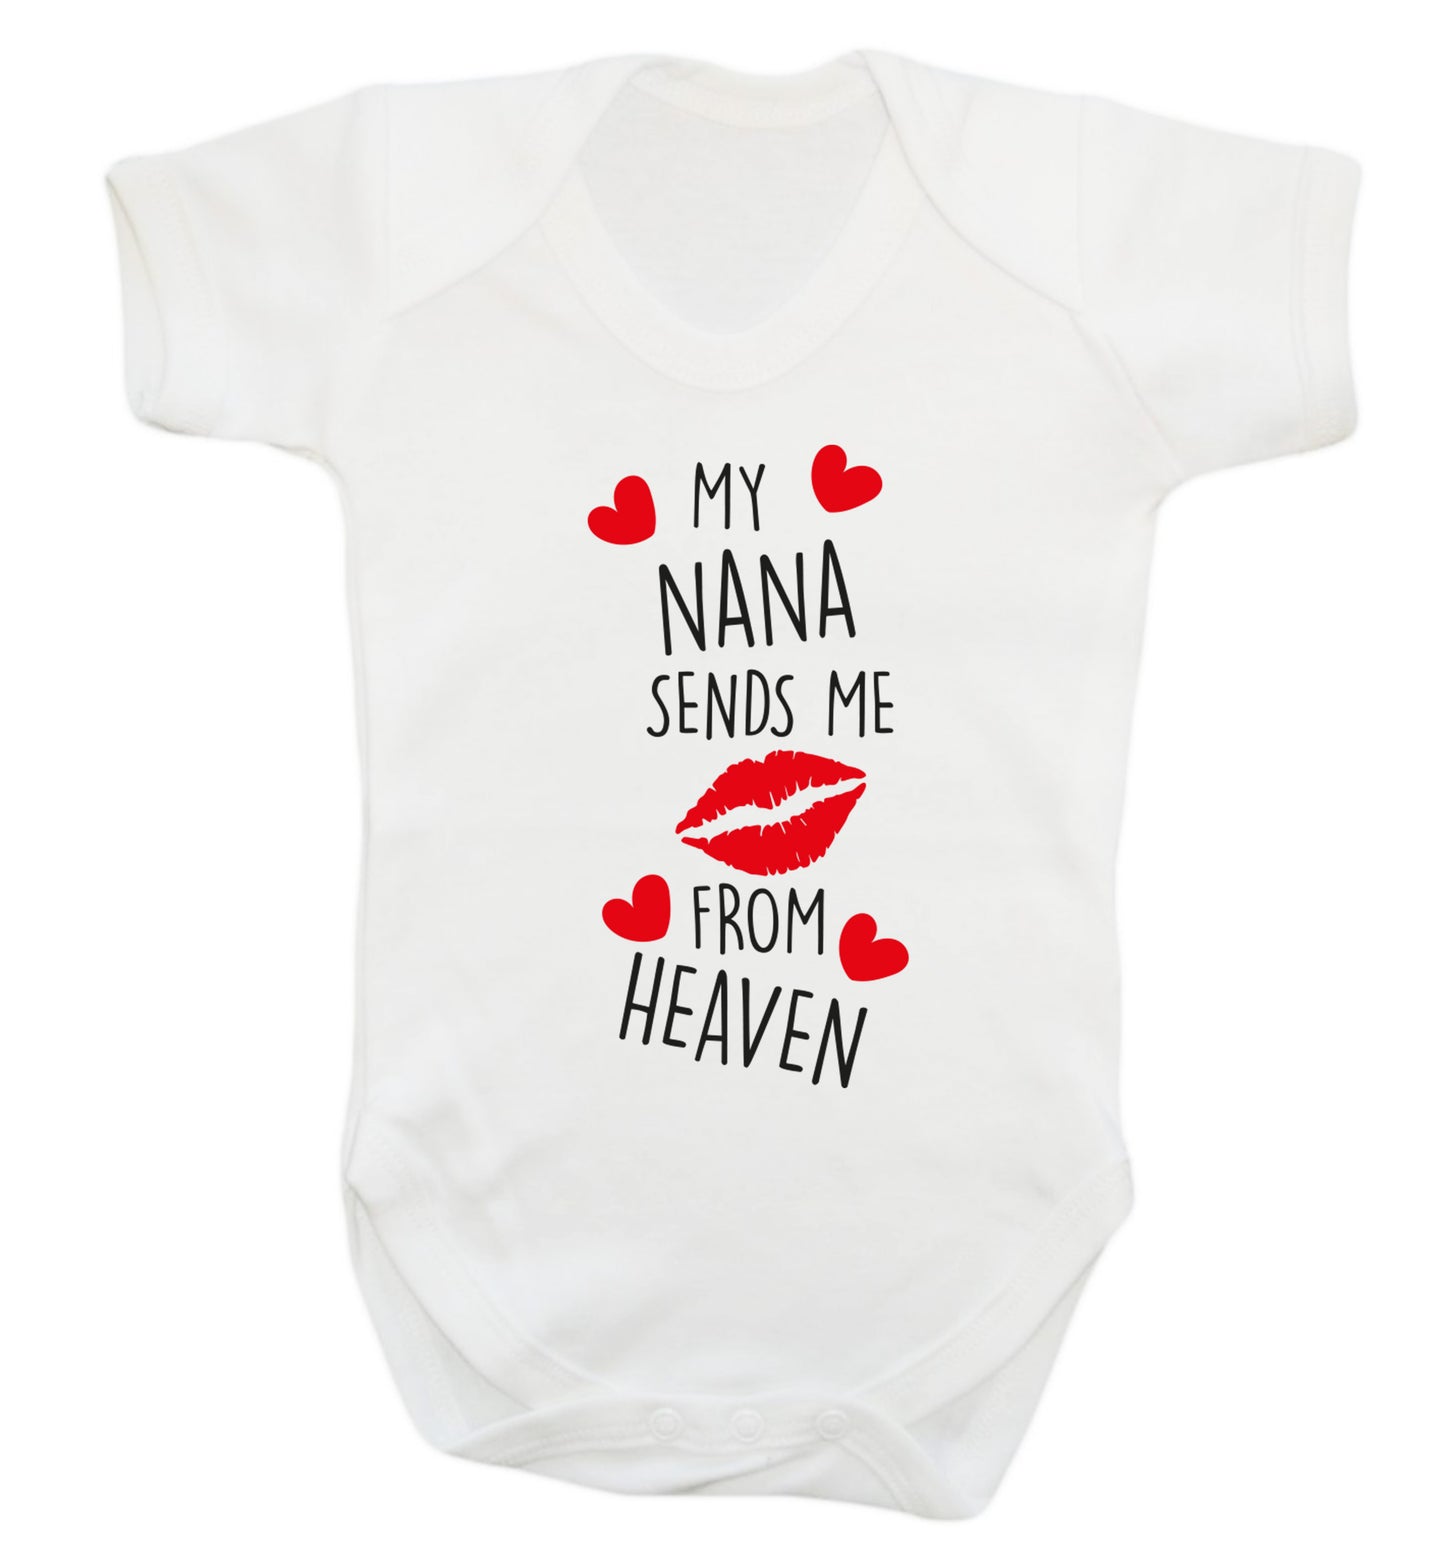 My nana sends me kisses from heaven Baby Vest white 18-24 months